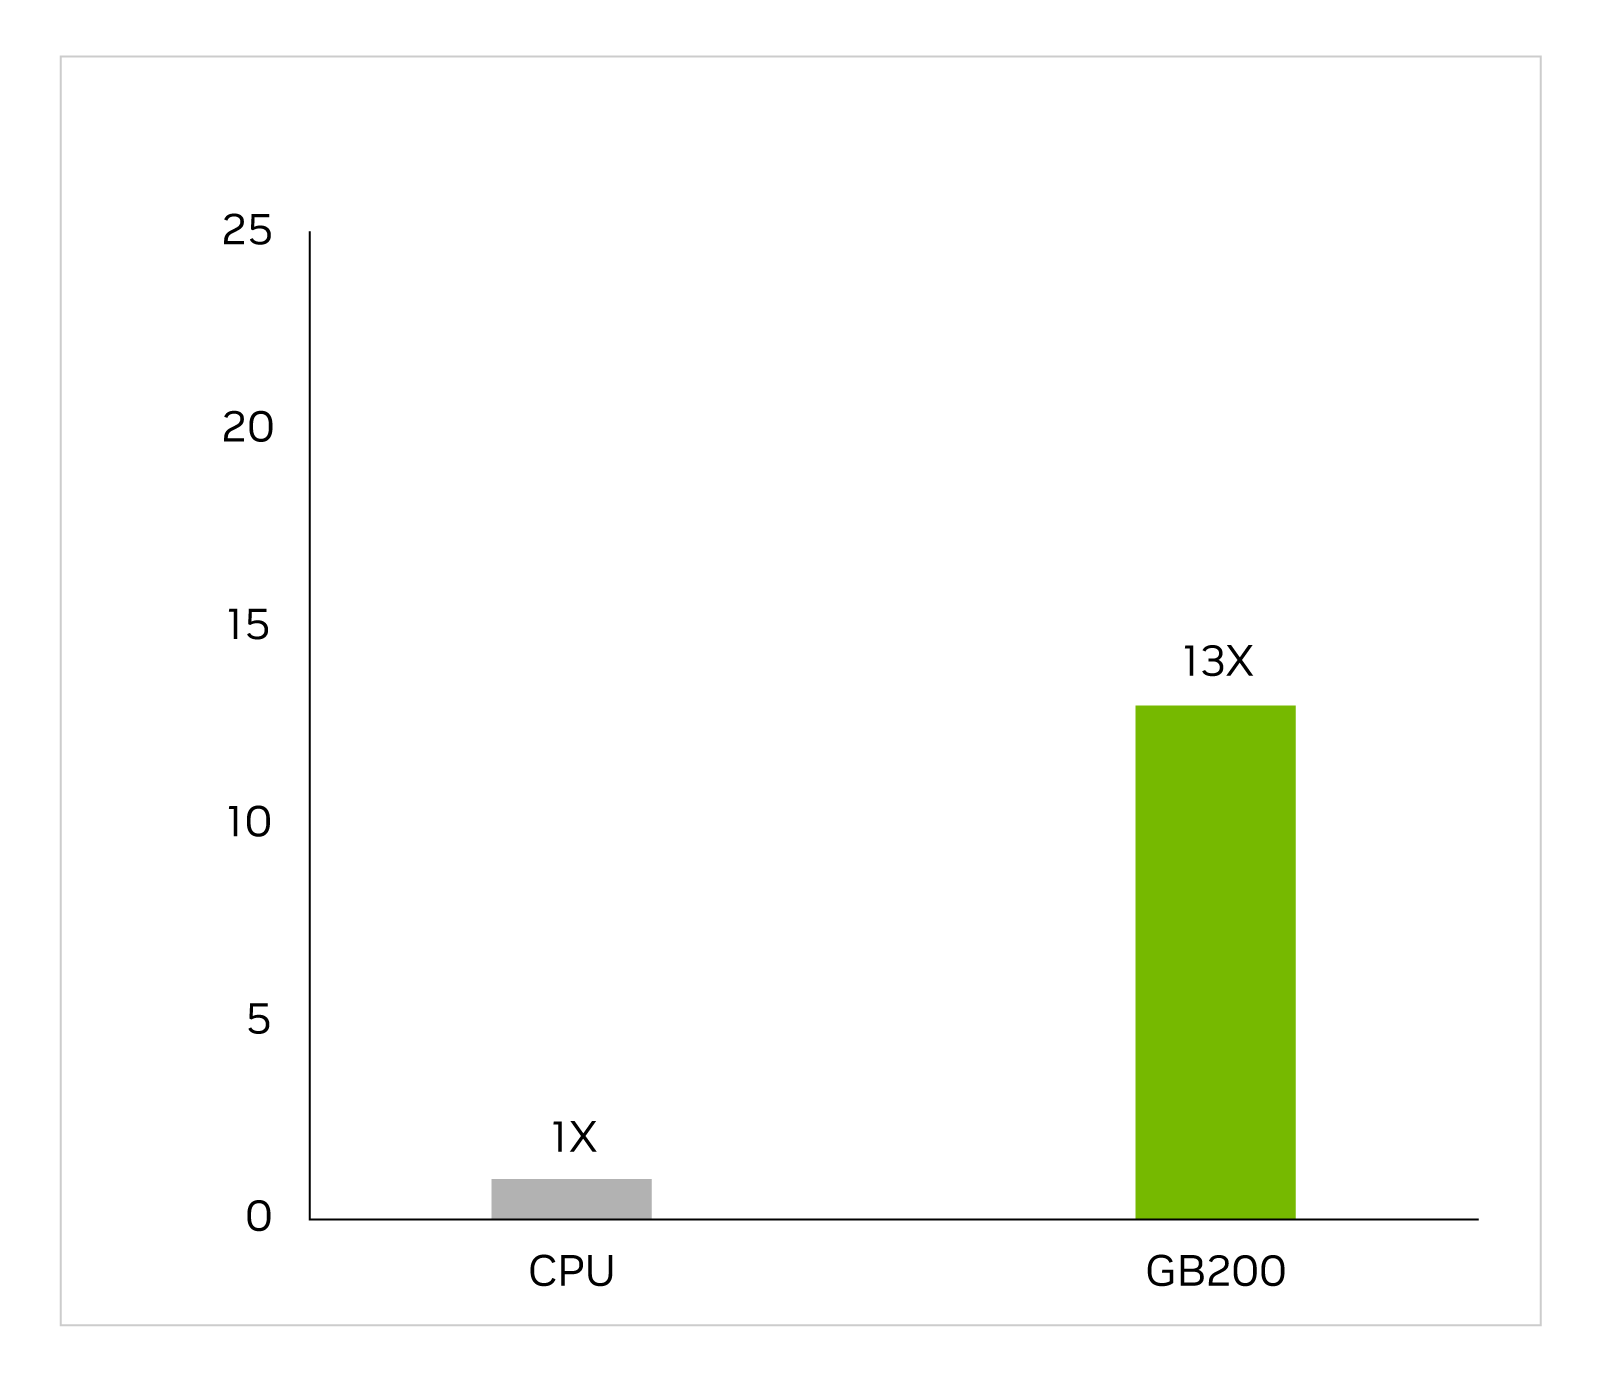 A bar chart, showing CPU with a value of 1x and GB200 with a value of 13x.